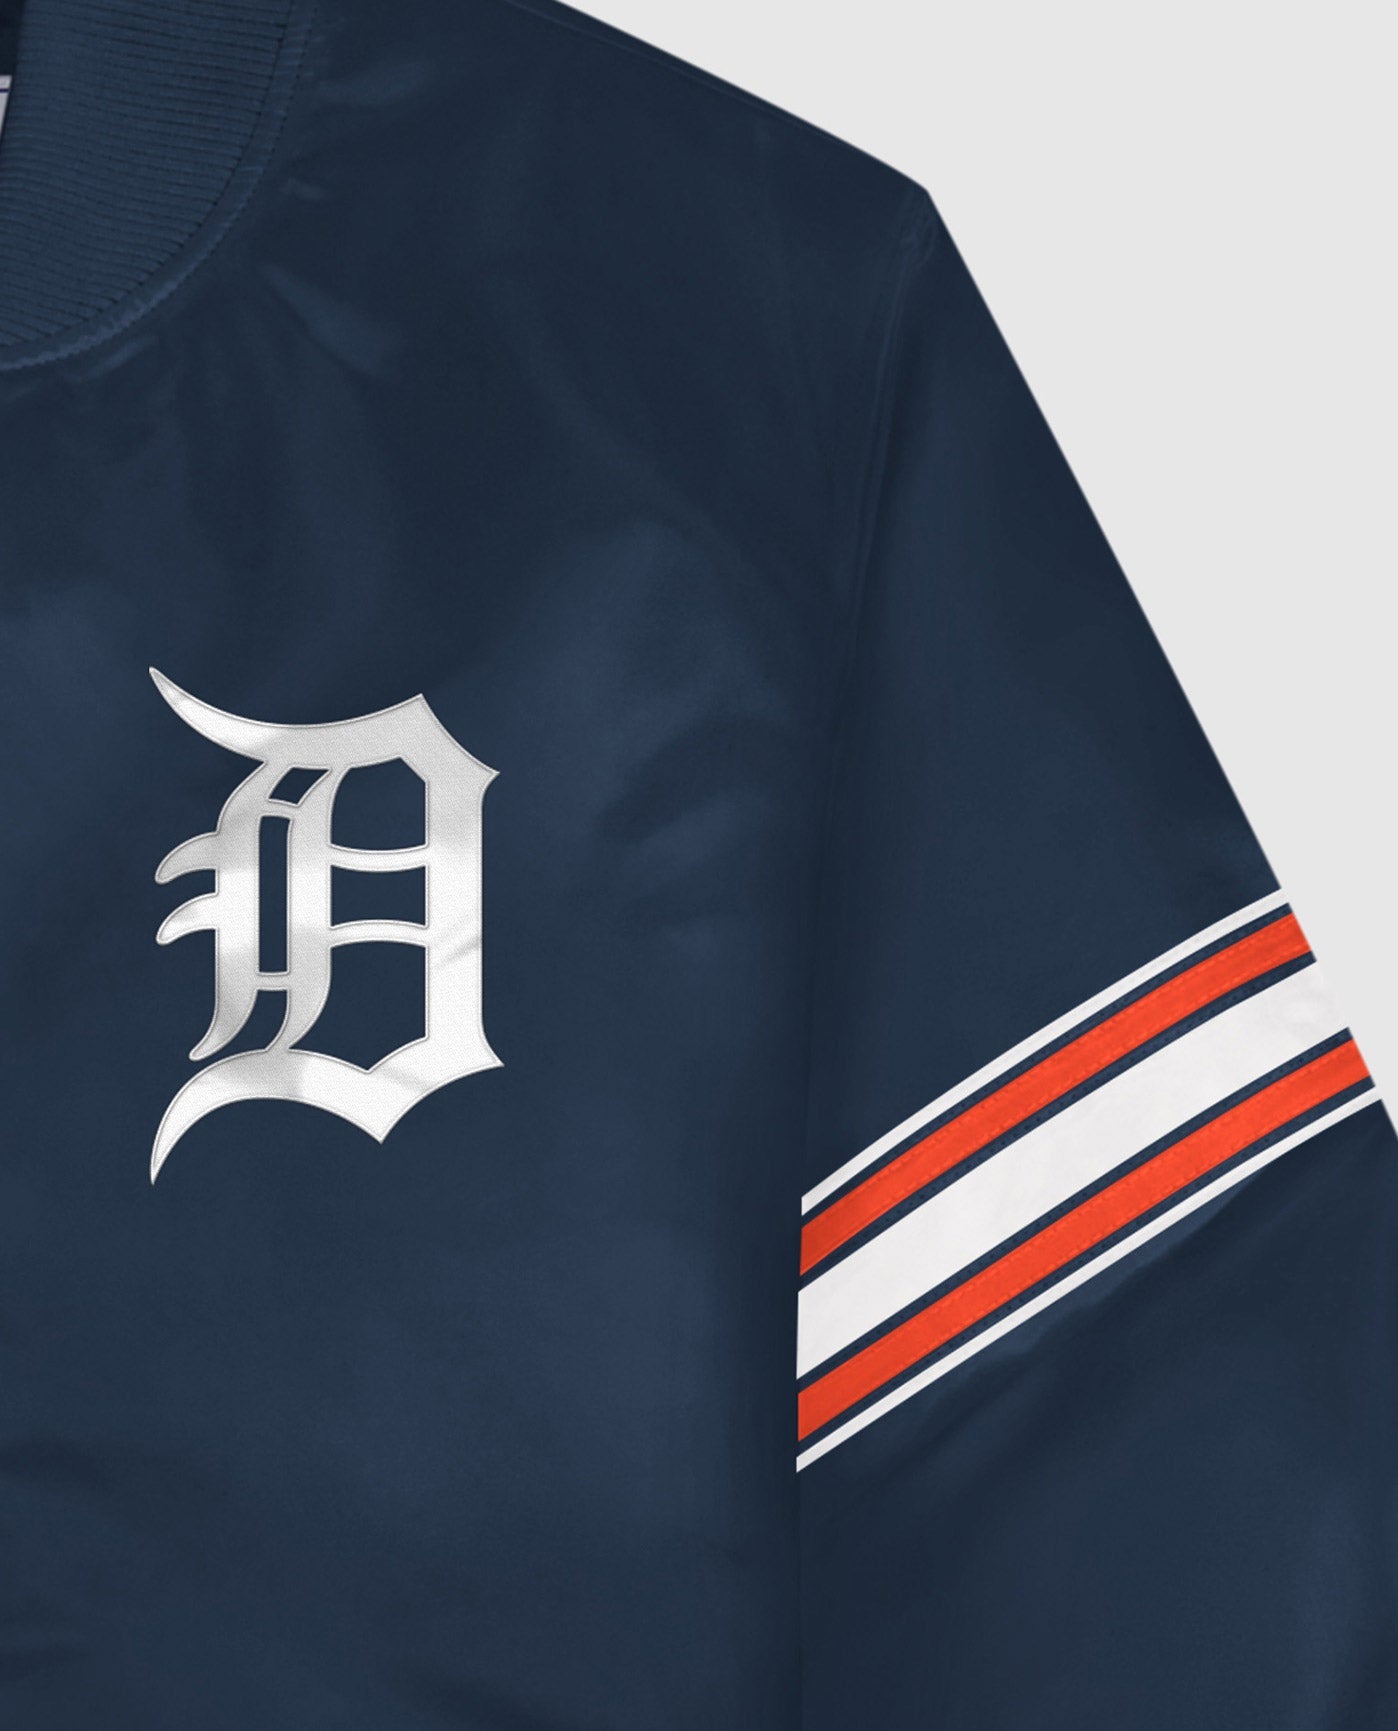 Detroit Tigers Twill Applique Logo And Color Stripe Sleeve | Tigers Navy